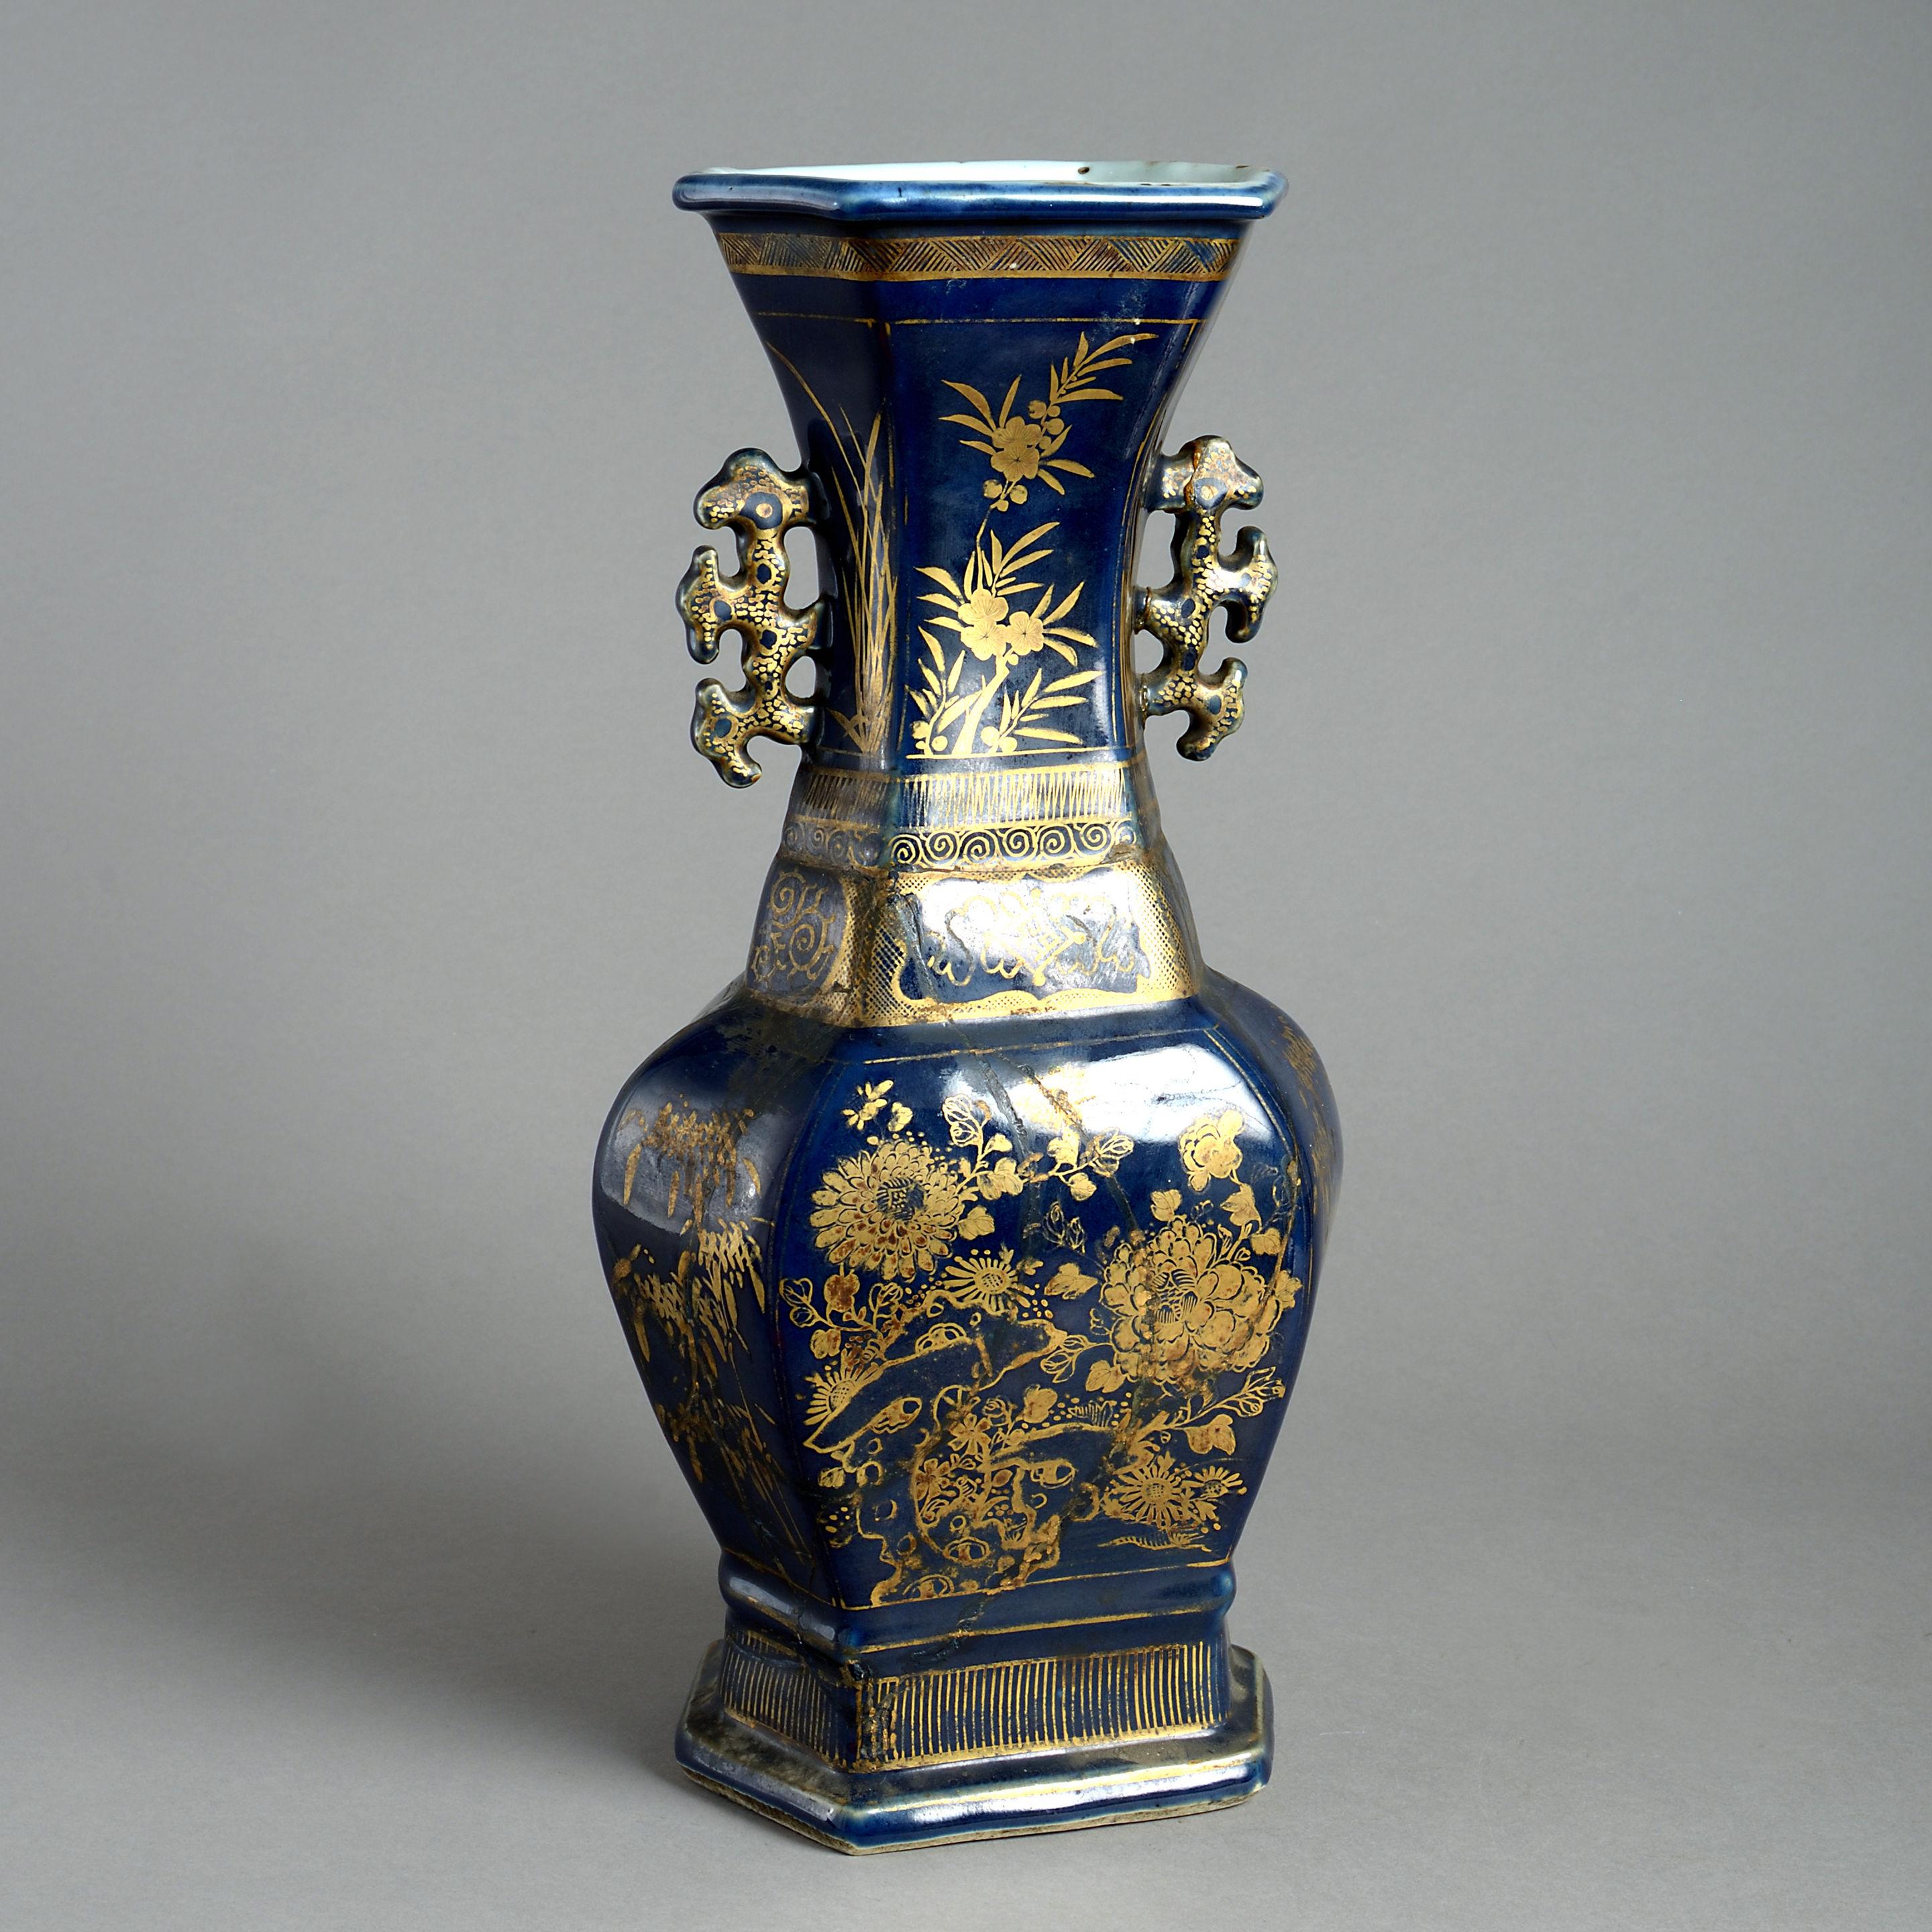 A late 18th century porcelain vase of faceted form, having handles and gilded decoration throughout upon a deep blue ground. 

Restored throughout.